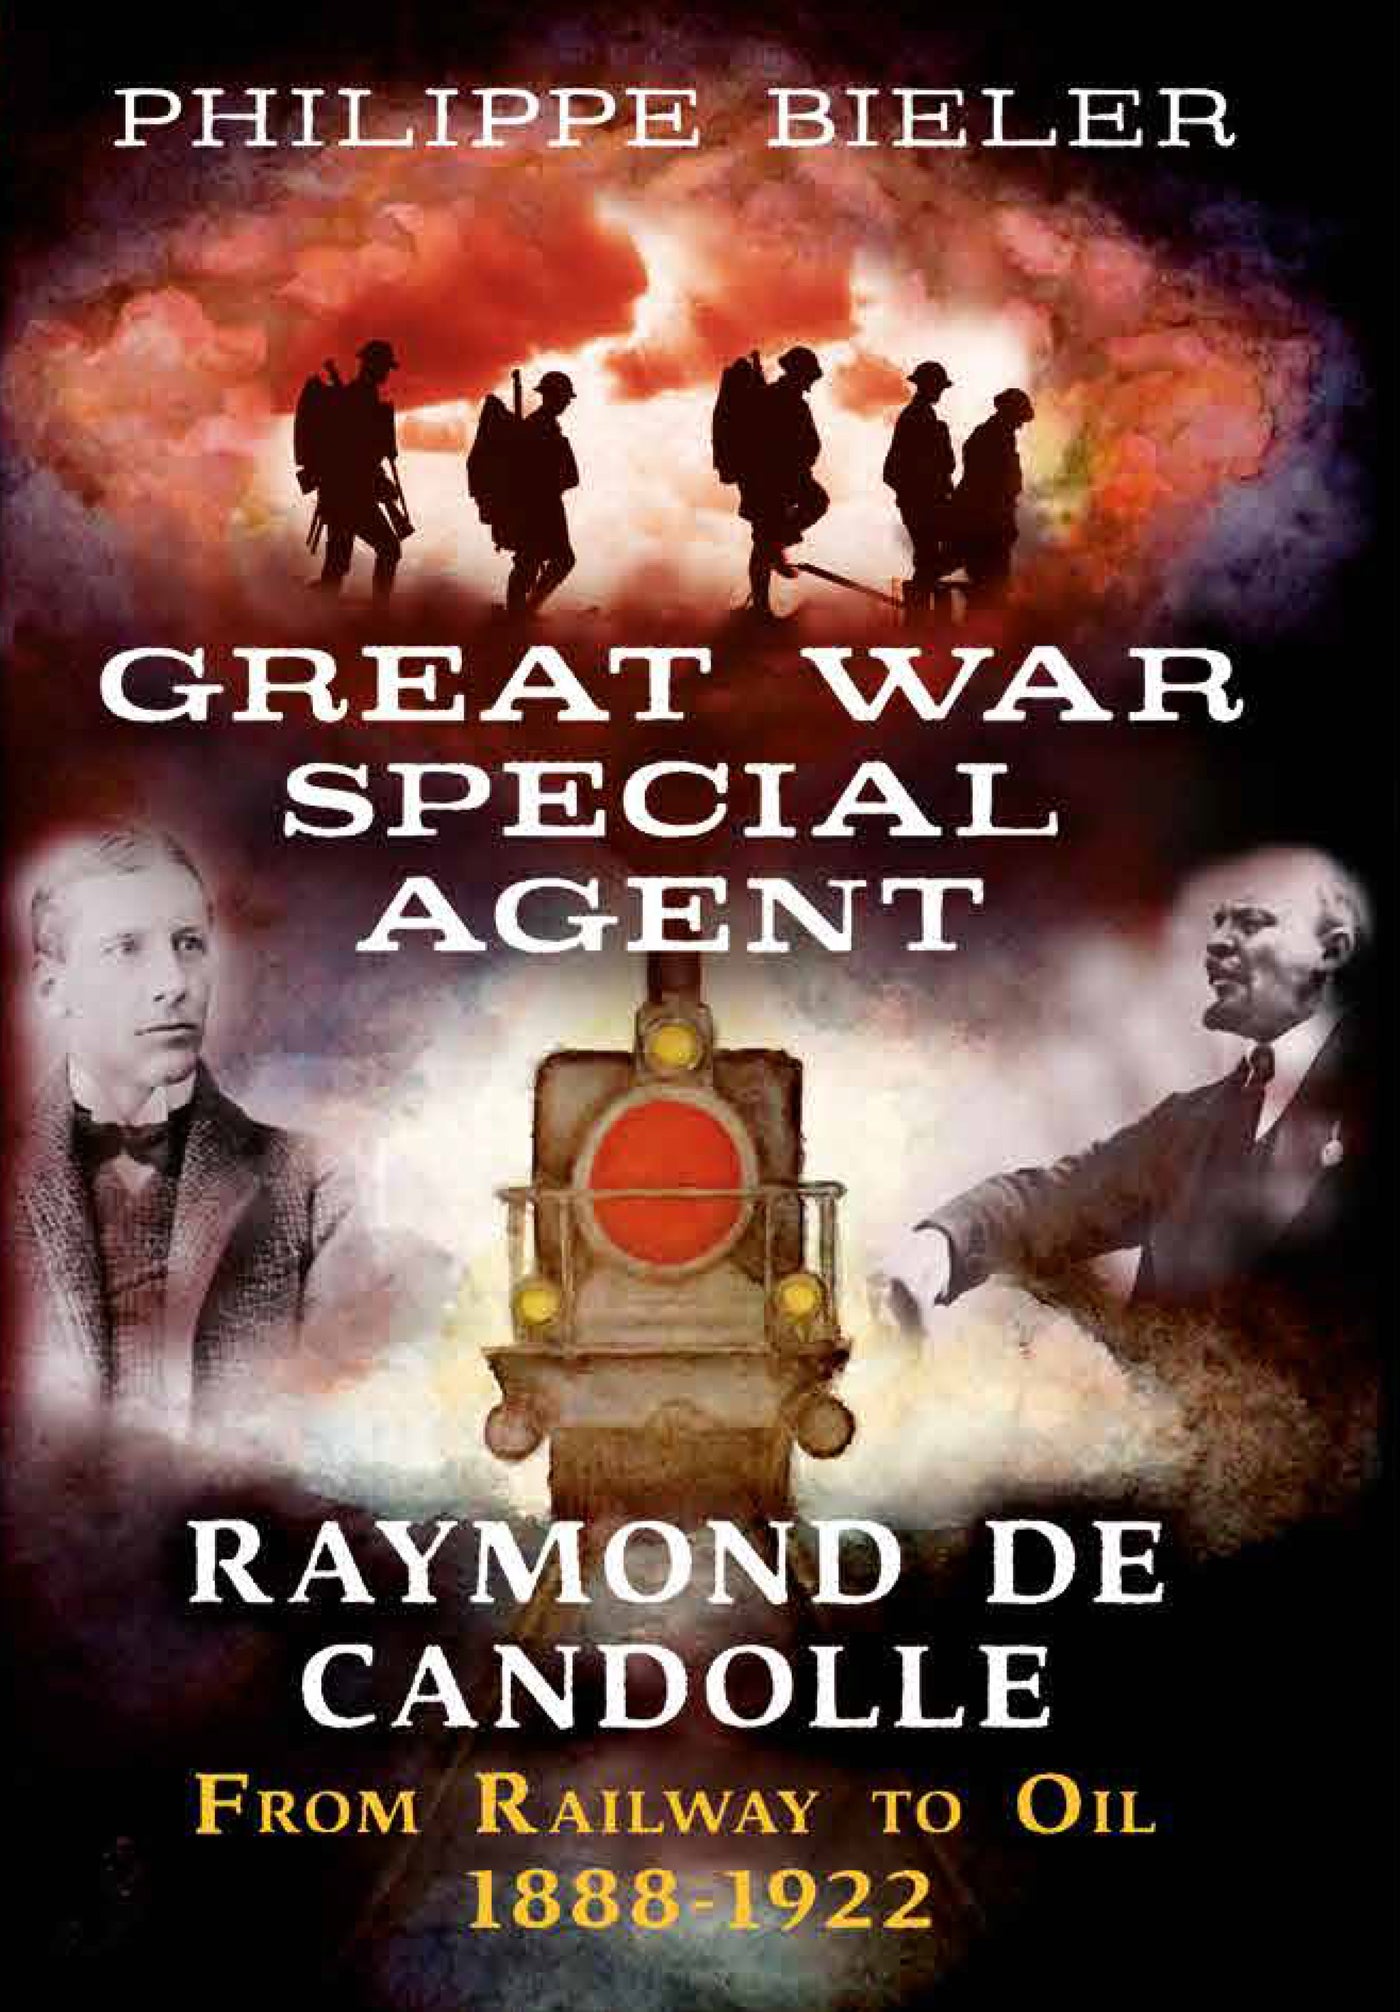 Great War Special Agent Raymond de Candolle